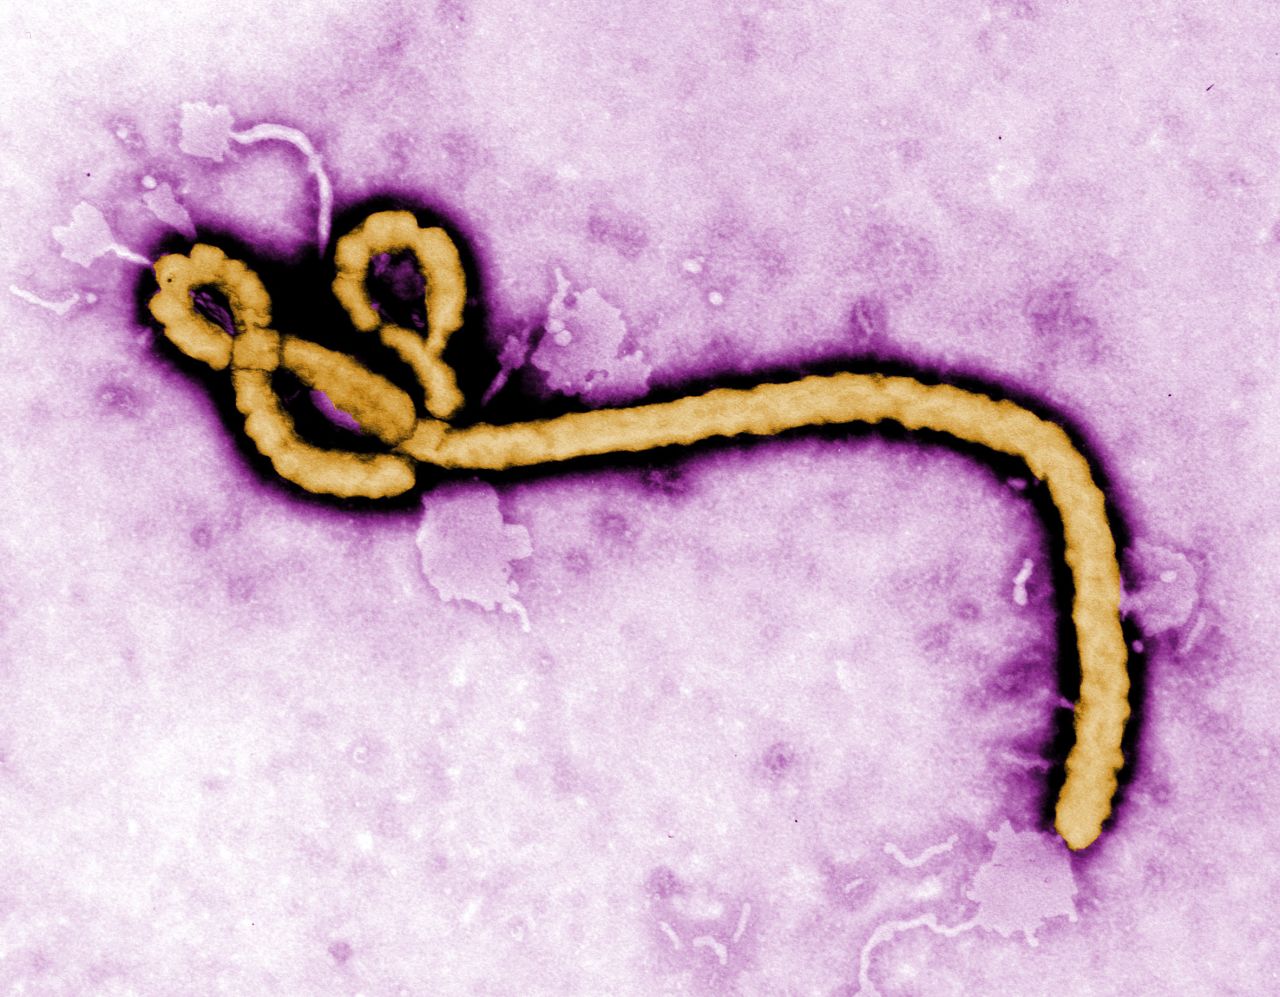 In 2014, the Ebola virus became internationally known due to an outbreak in West Africa, which killed more than 11,300 people. Pictured is a colorized transmission electron micrograph of an Ebola virus particle.